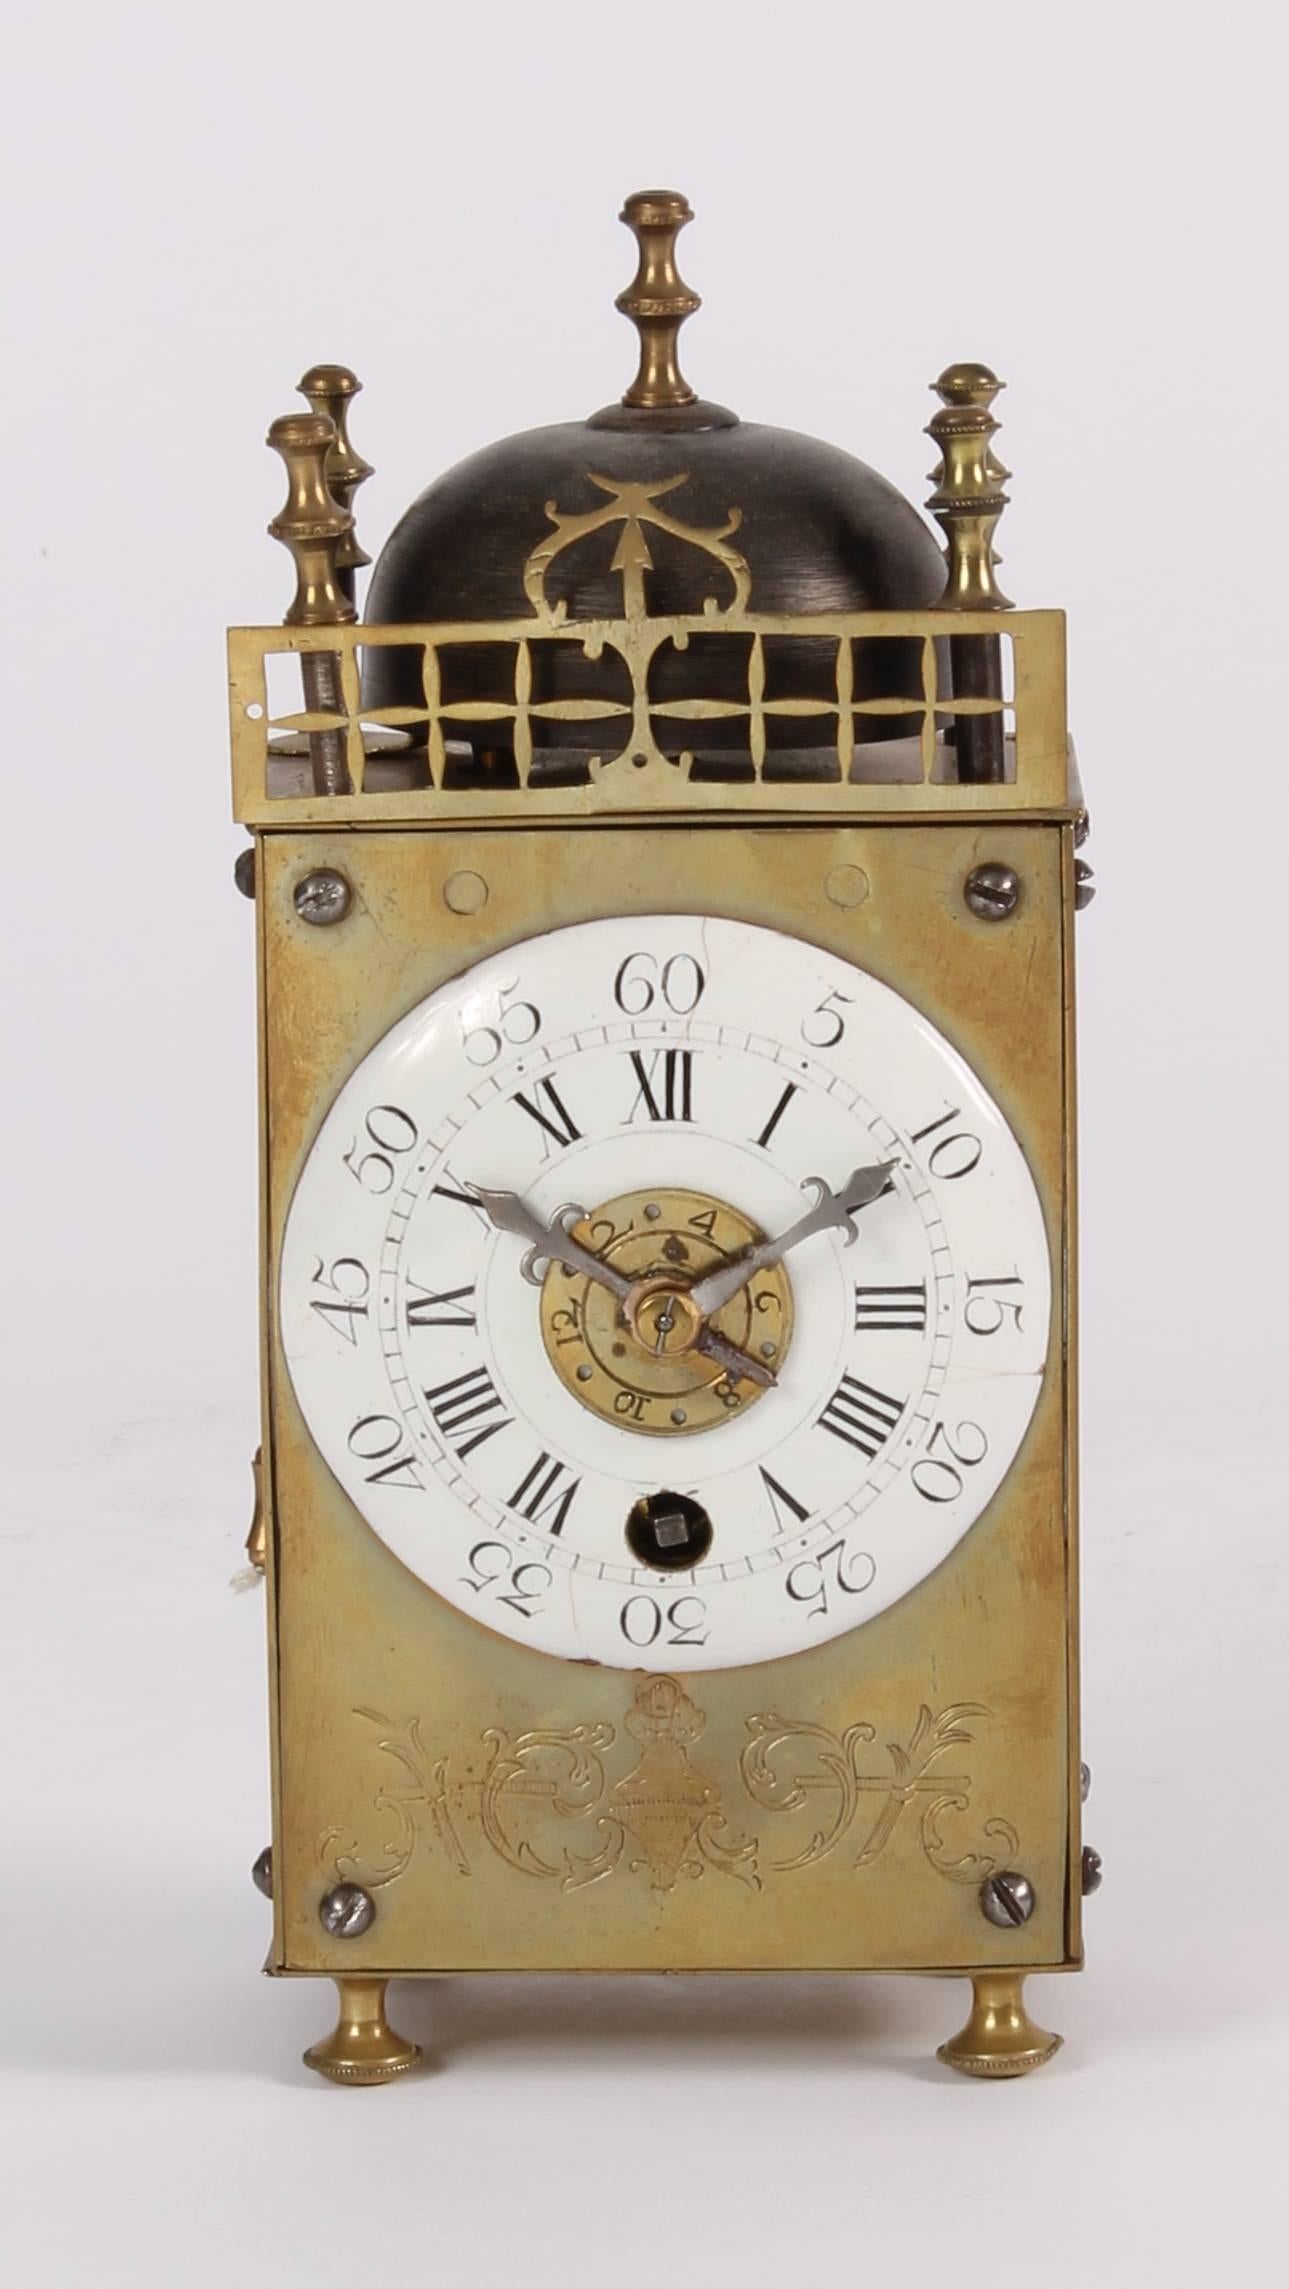 6 cm enamel dial with Roman numerals and five minute marking, iron hands and engraved alarm disc, 30-hour anchor movement with silk suspended pendulum and pull-wind alarm on a bell surmounting the brass case with pierced brass front fret and five